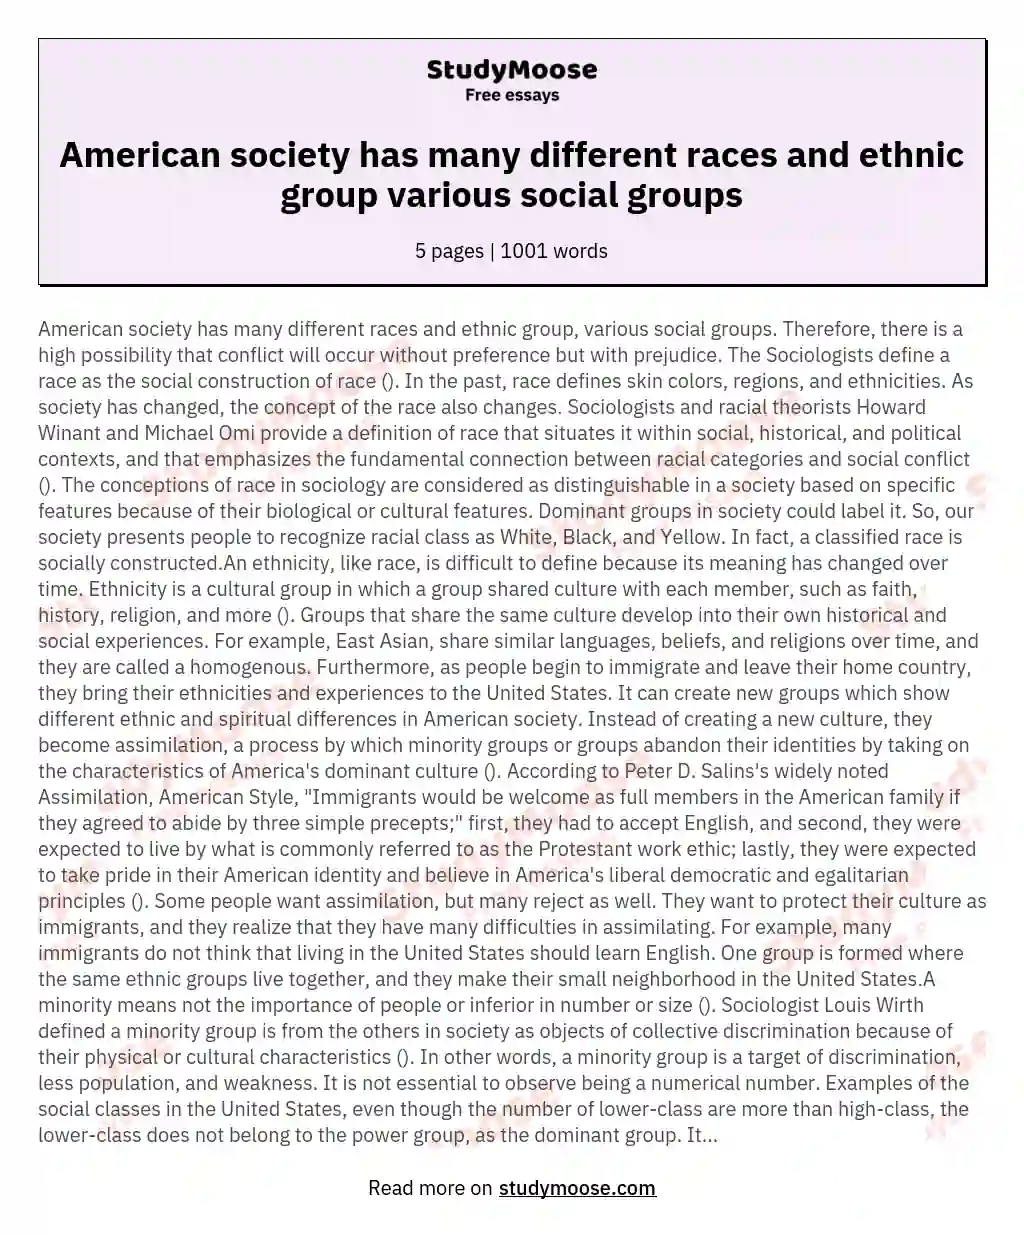 American society has many different races and ethnic group various social groups